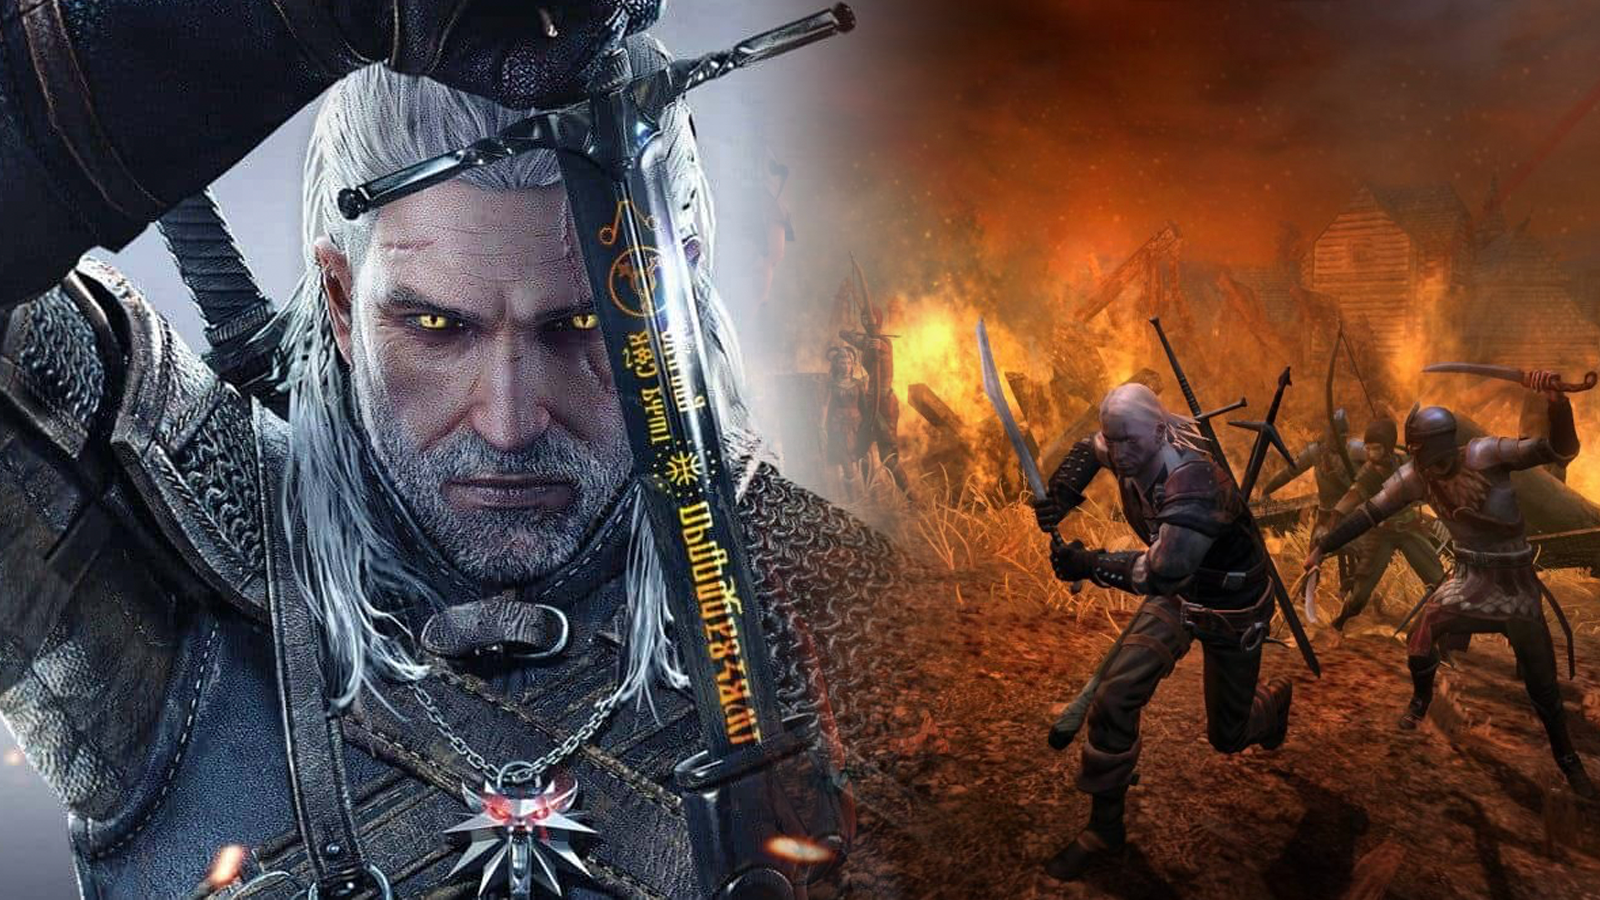 How the Witcher 1 Remake's Geralt Will Differ From The Witcher 3